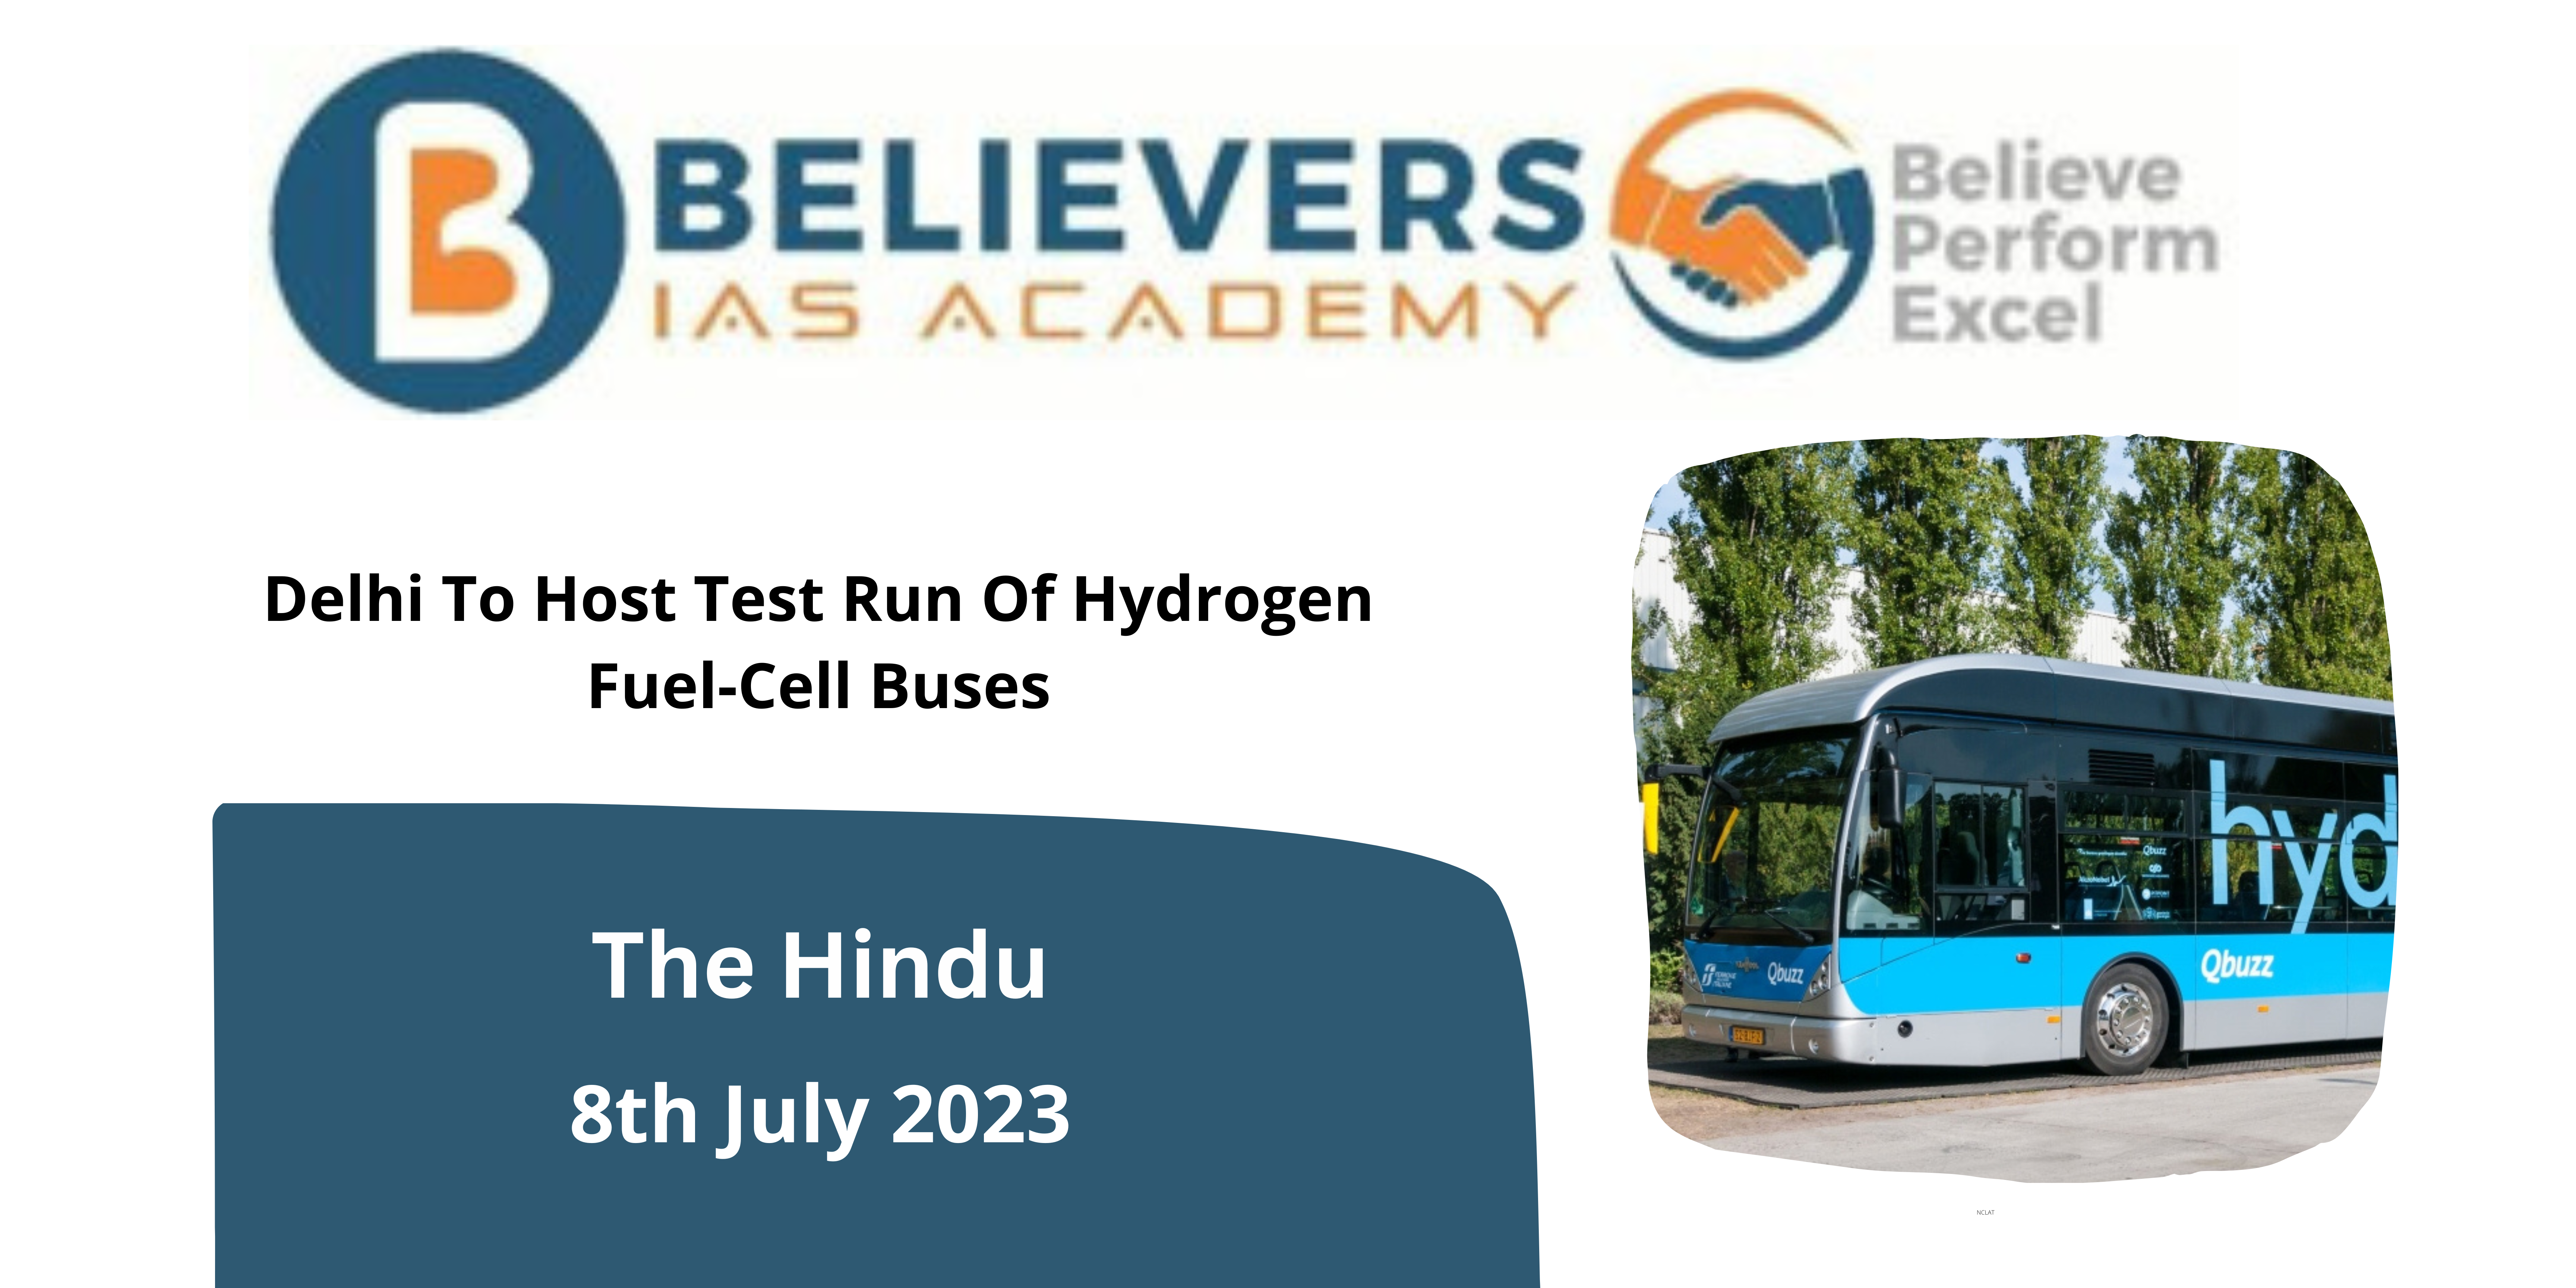 Delhi To Host Test Run Of Hydrogen Fuel-Cell Buses